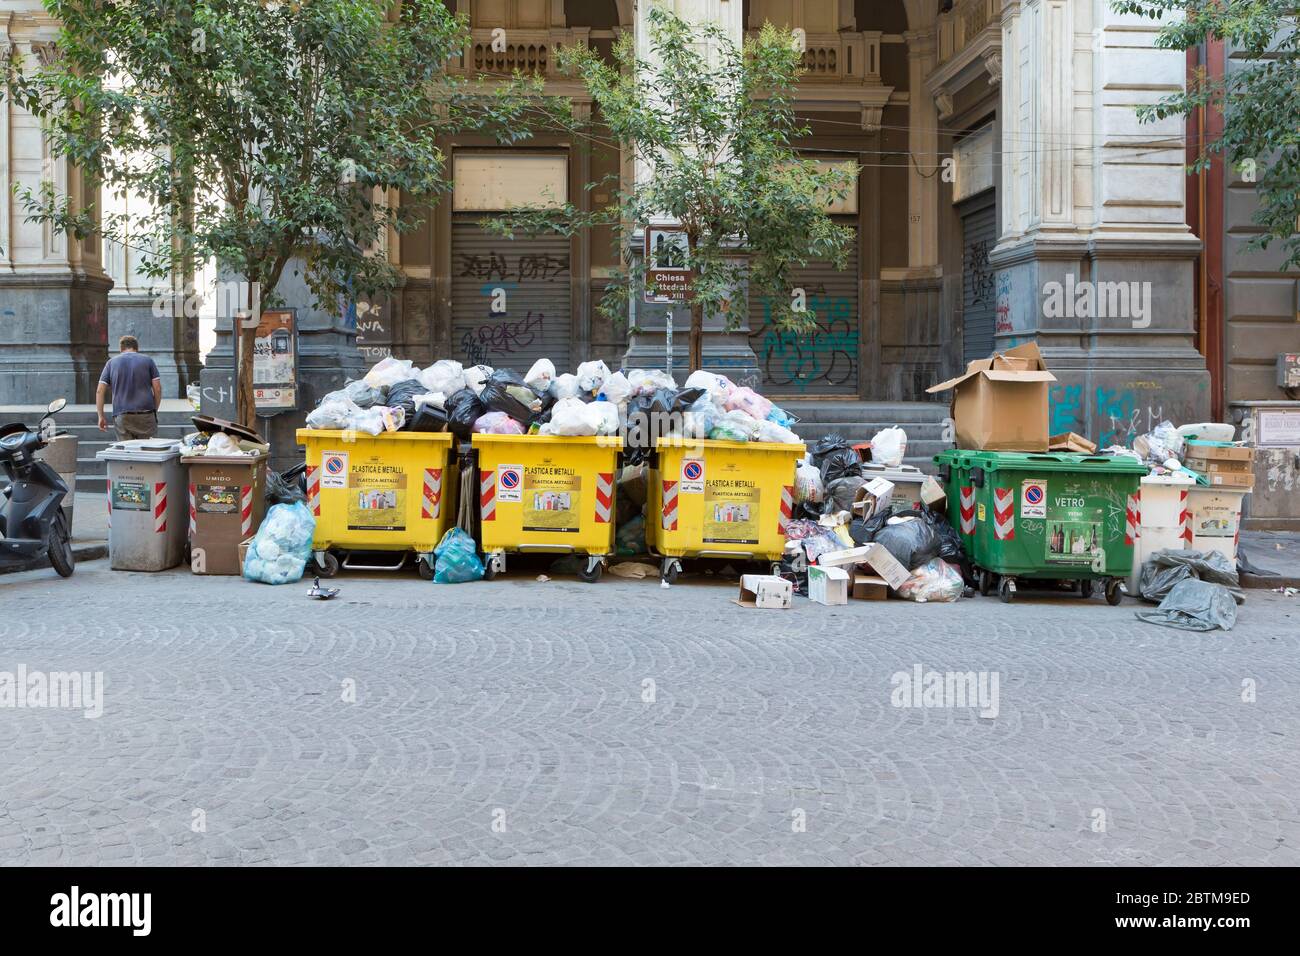 Rubbish piled high on the streets of central Naples, Italy Stock Photo